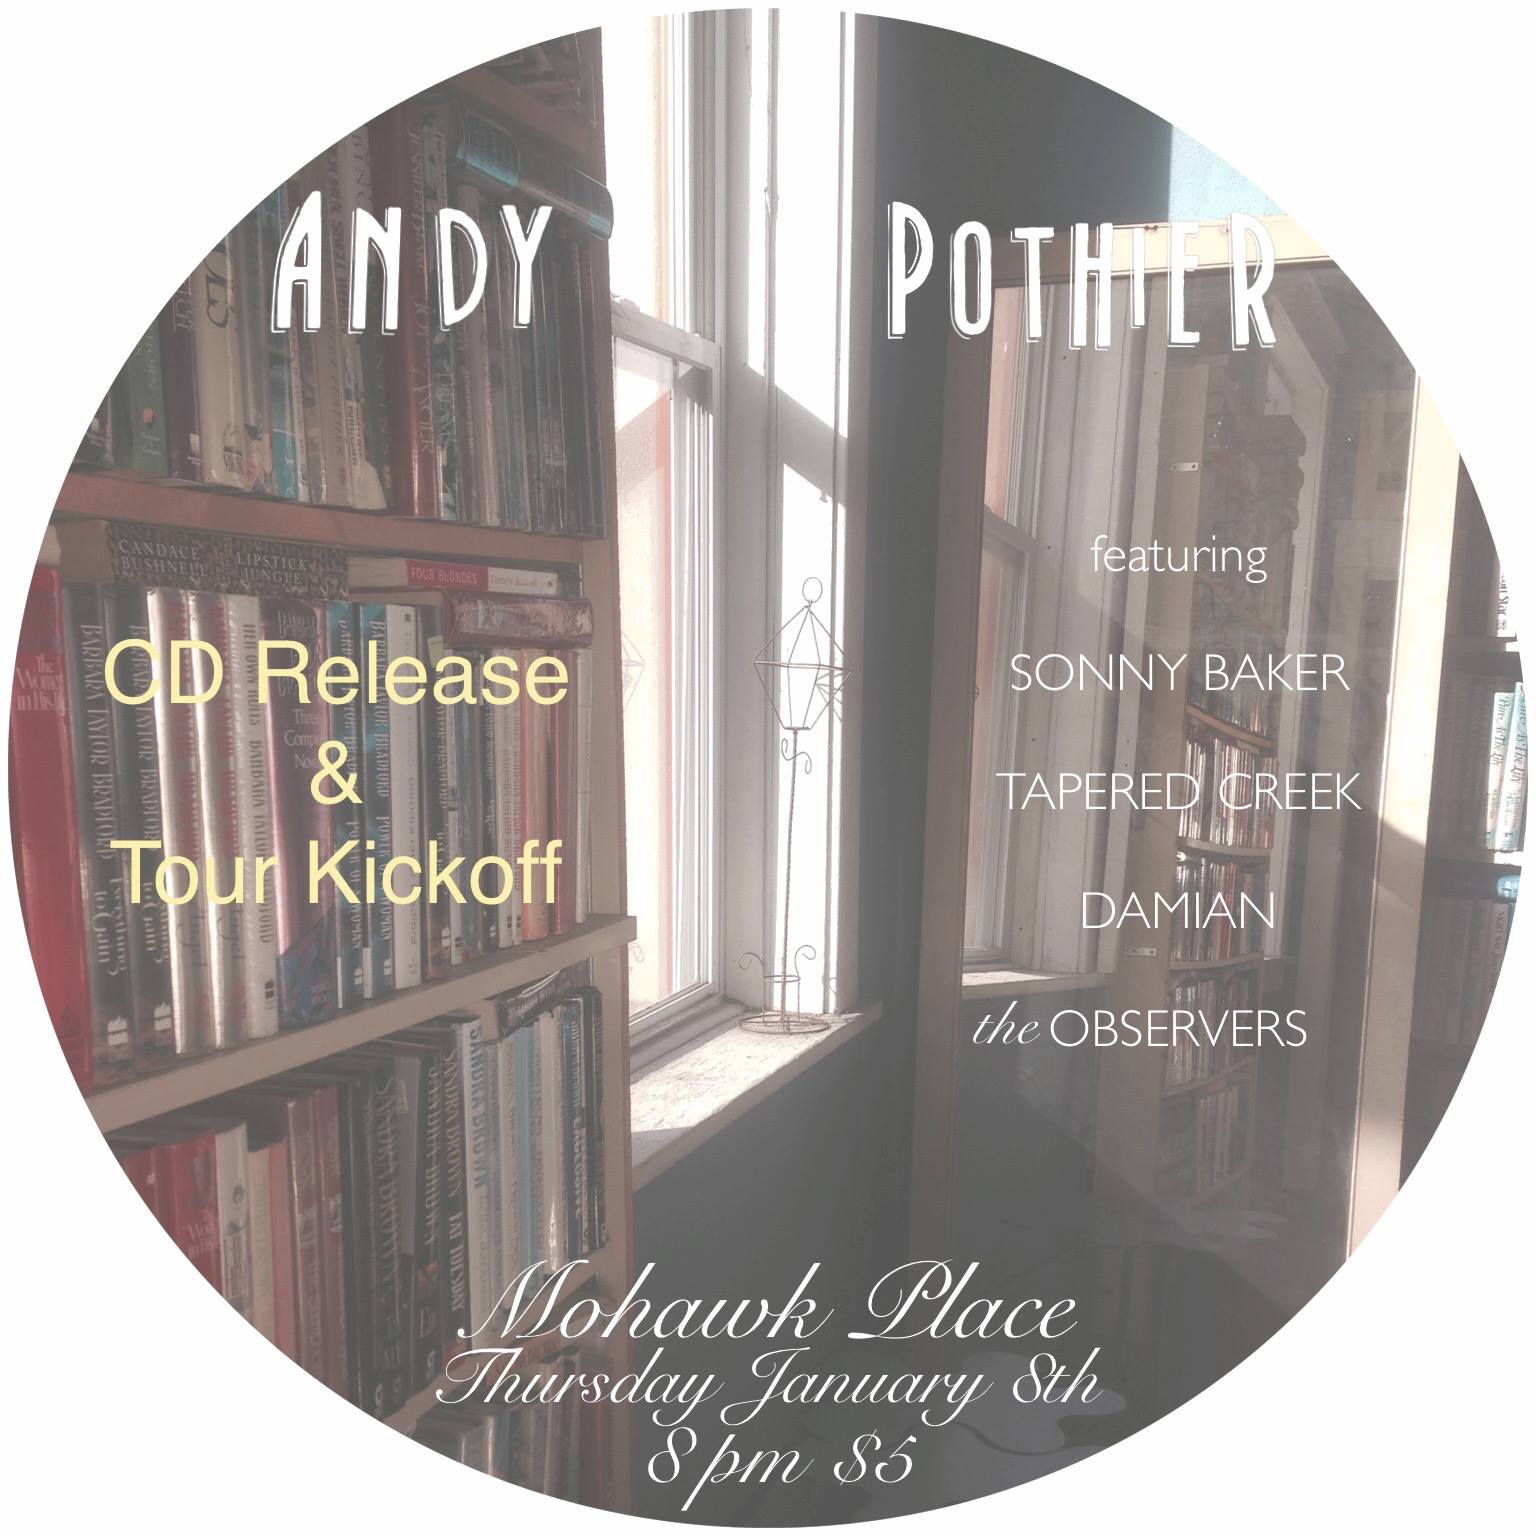 Tonight: Andy Pothier CD Release